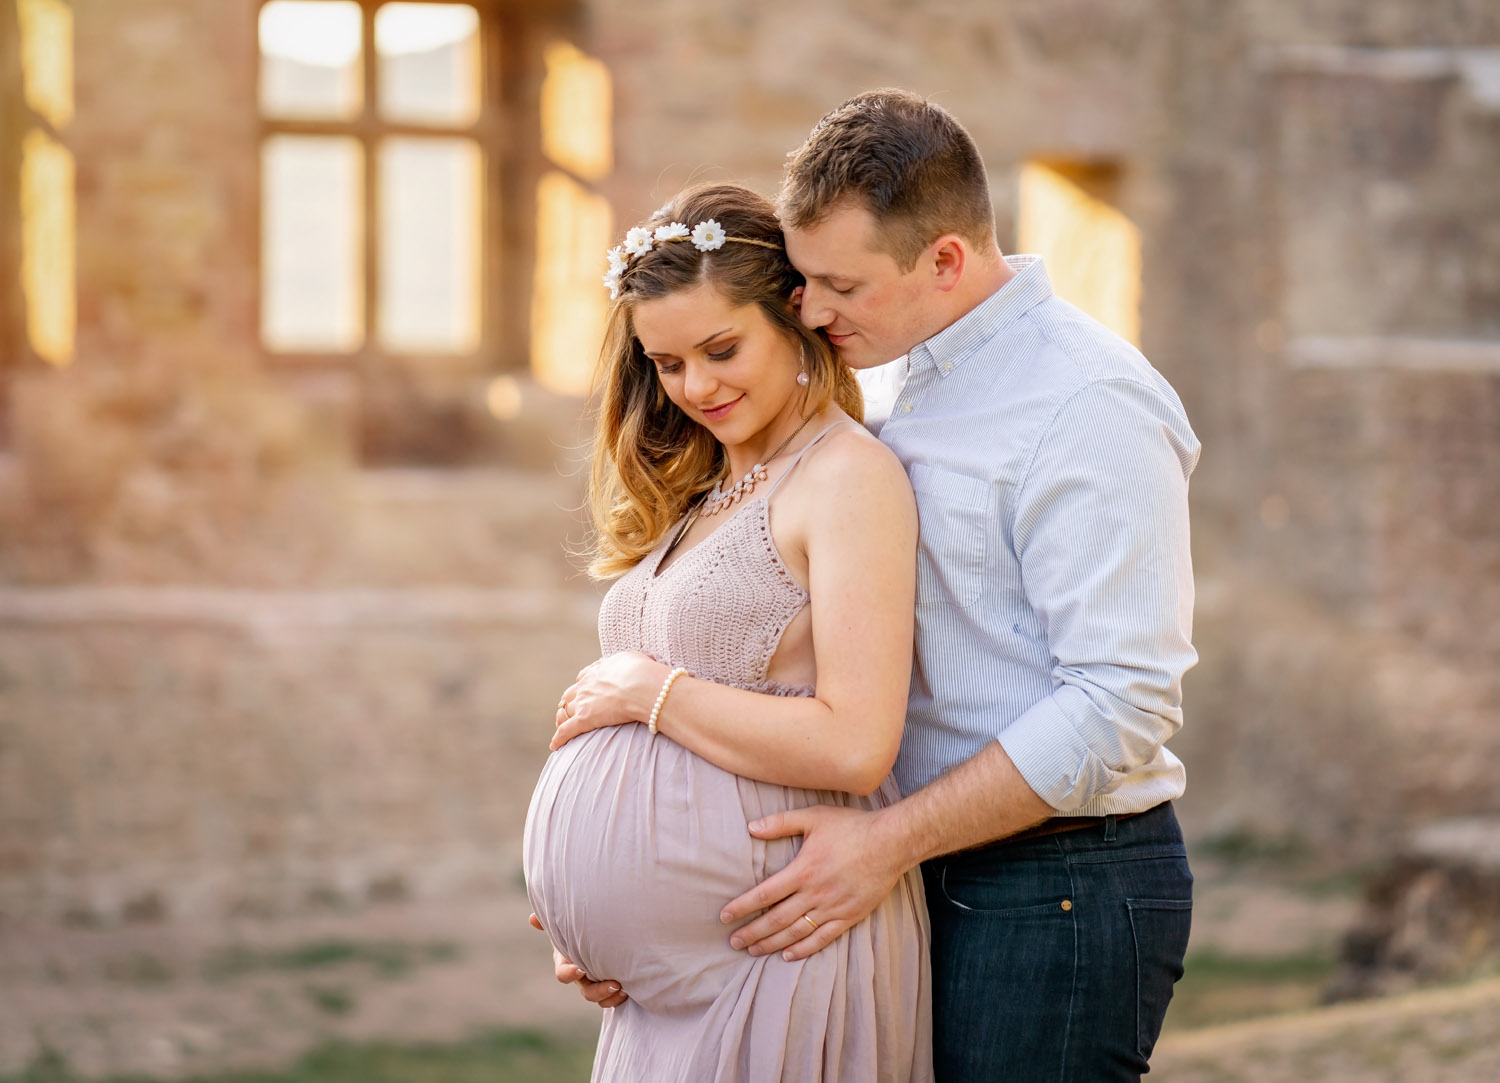  Romantic maternity Session at Lichtenberg Castle near Kusel with couple and expecting mother in summer time from natural light photographer Sarah Havens from Ramstein KMC area in Germany  Romantisches Schwangerschafts-Fotoshooting auf der Burg Licht